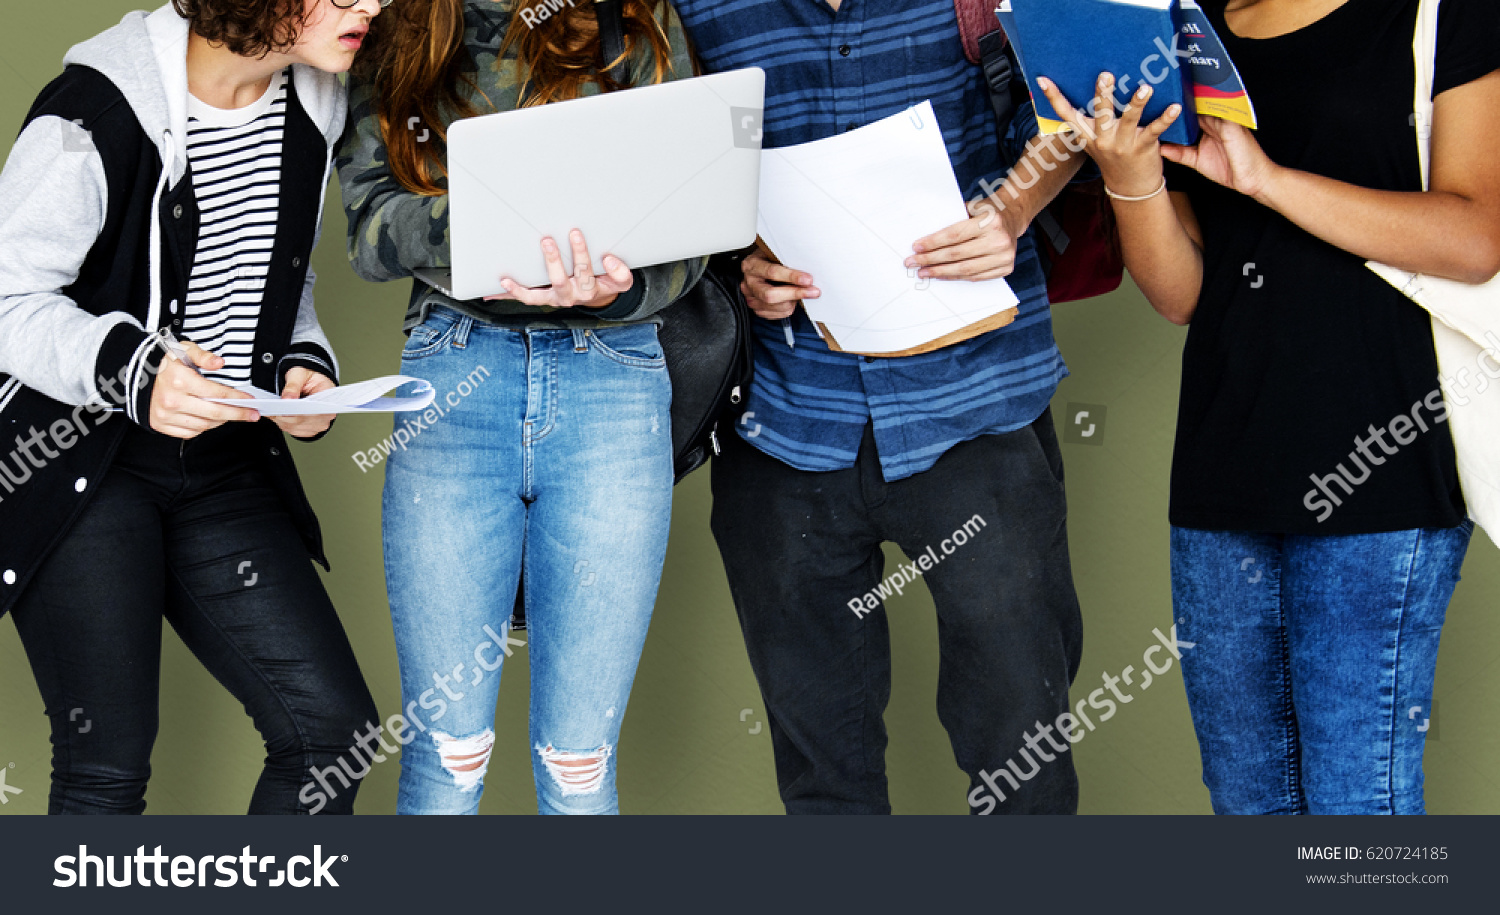 Group of Diverse High School Students Using Digital Devices Studio Portrait #620724185